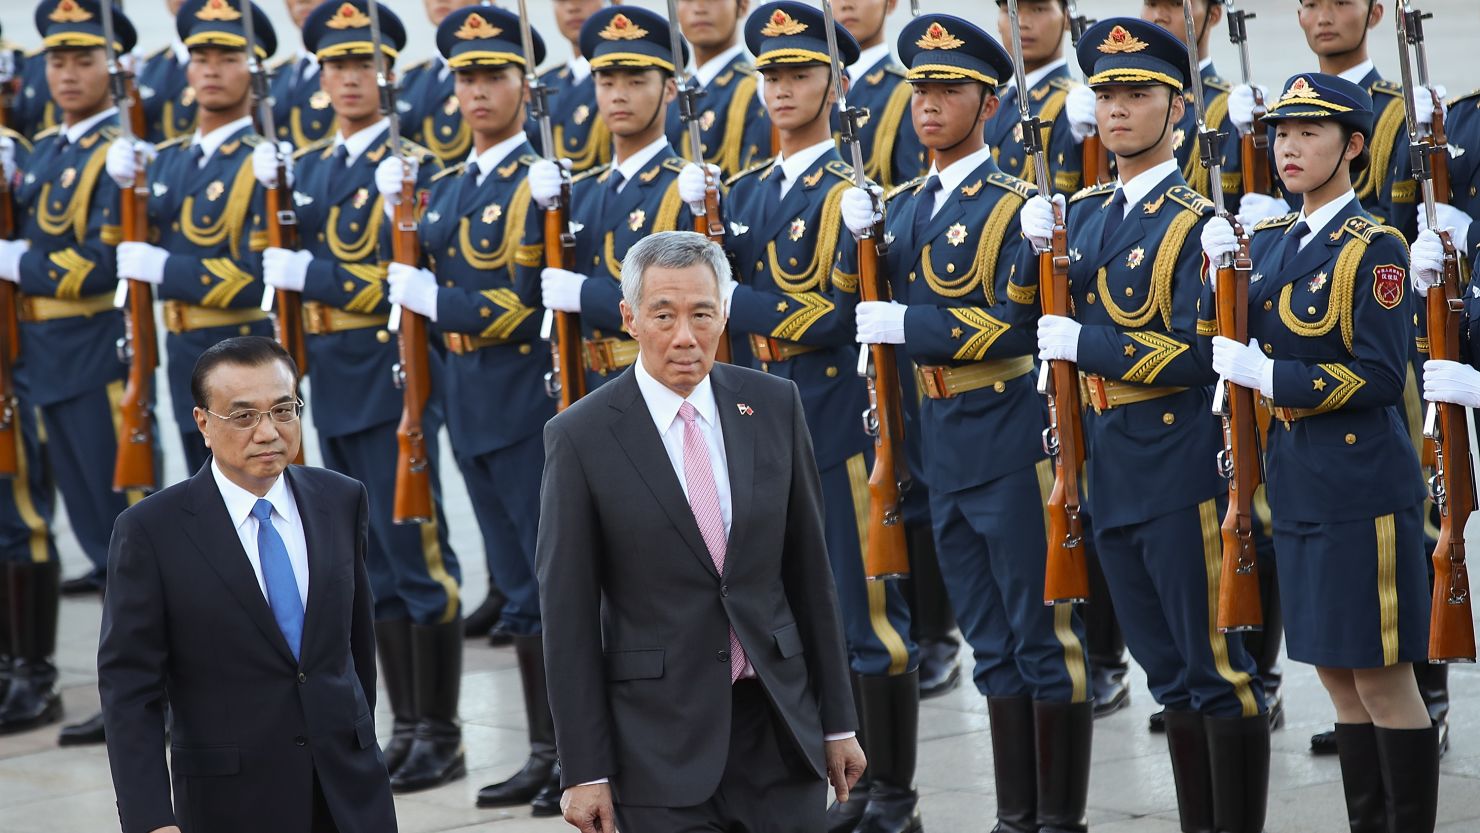 Singapore Prime Minister Lee Hsien Loong views a guard of honor with China's Premier Li Keqiang during a welcoming ceremony outside the Great Hall of the People on September 19, 2017 in Beijing, China.